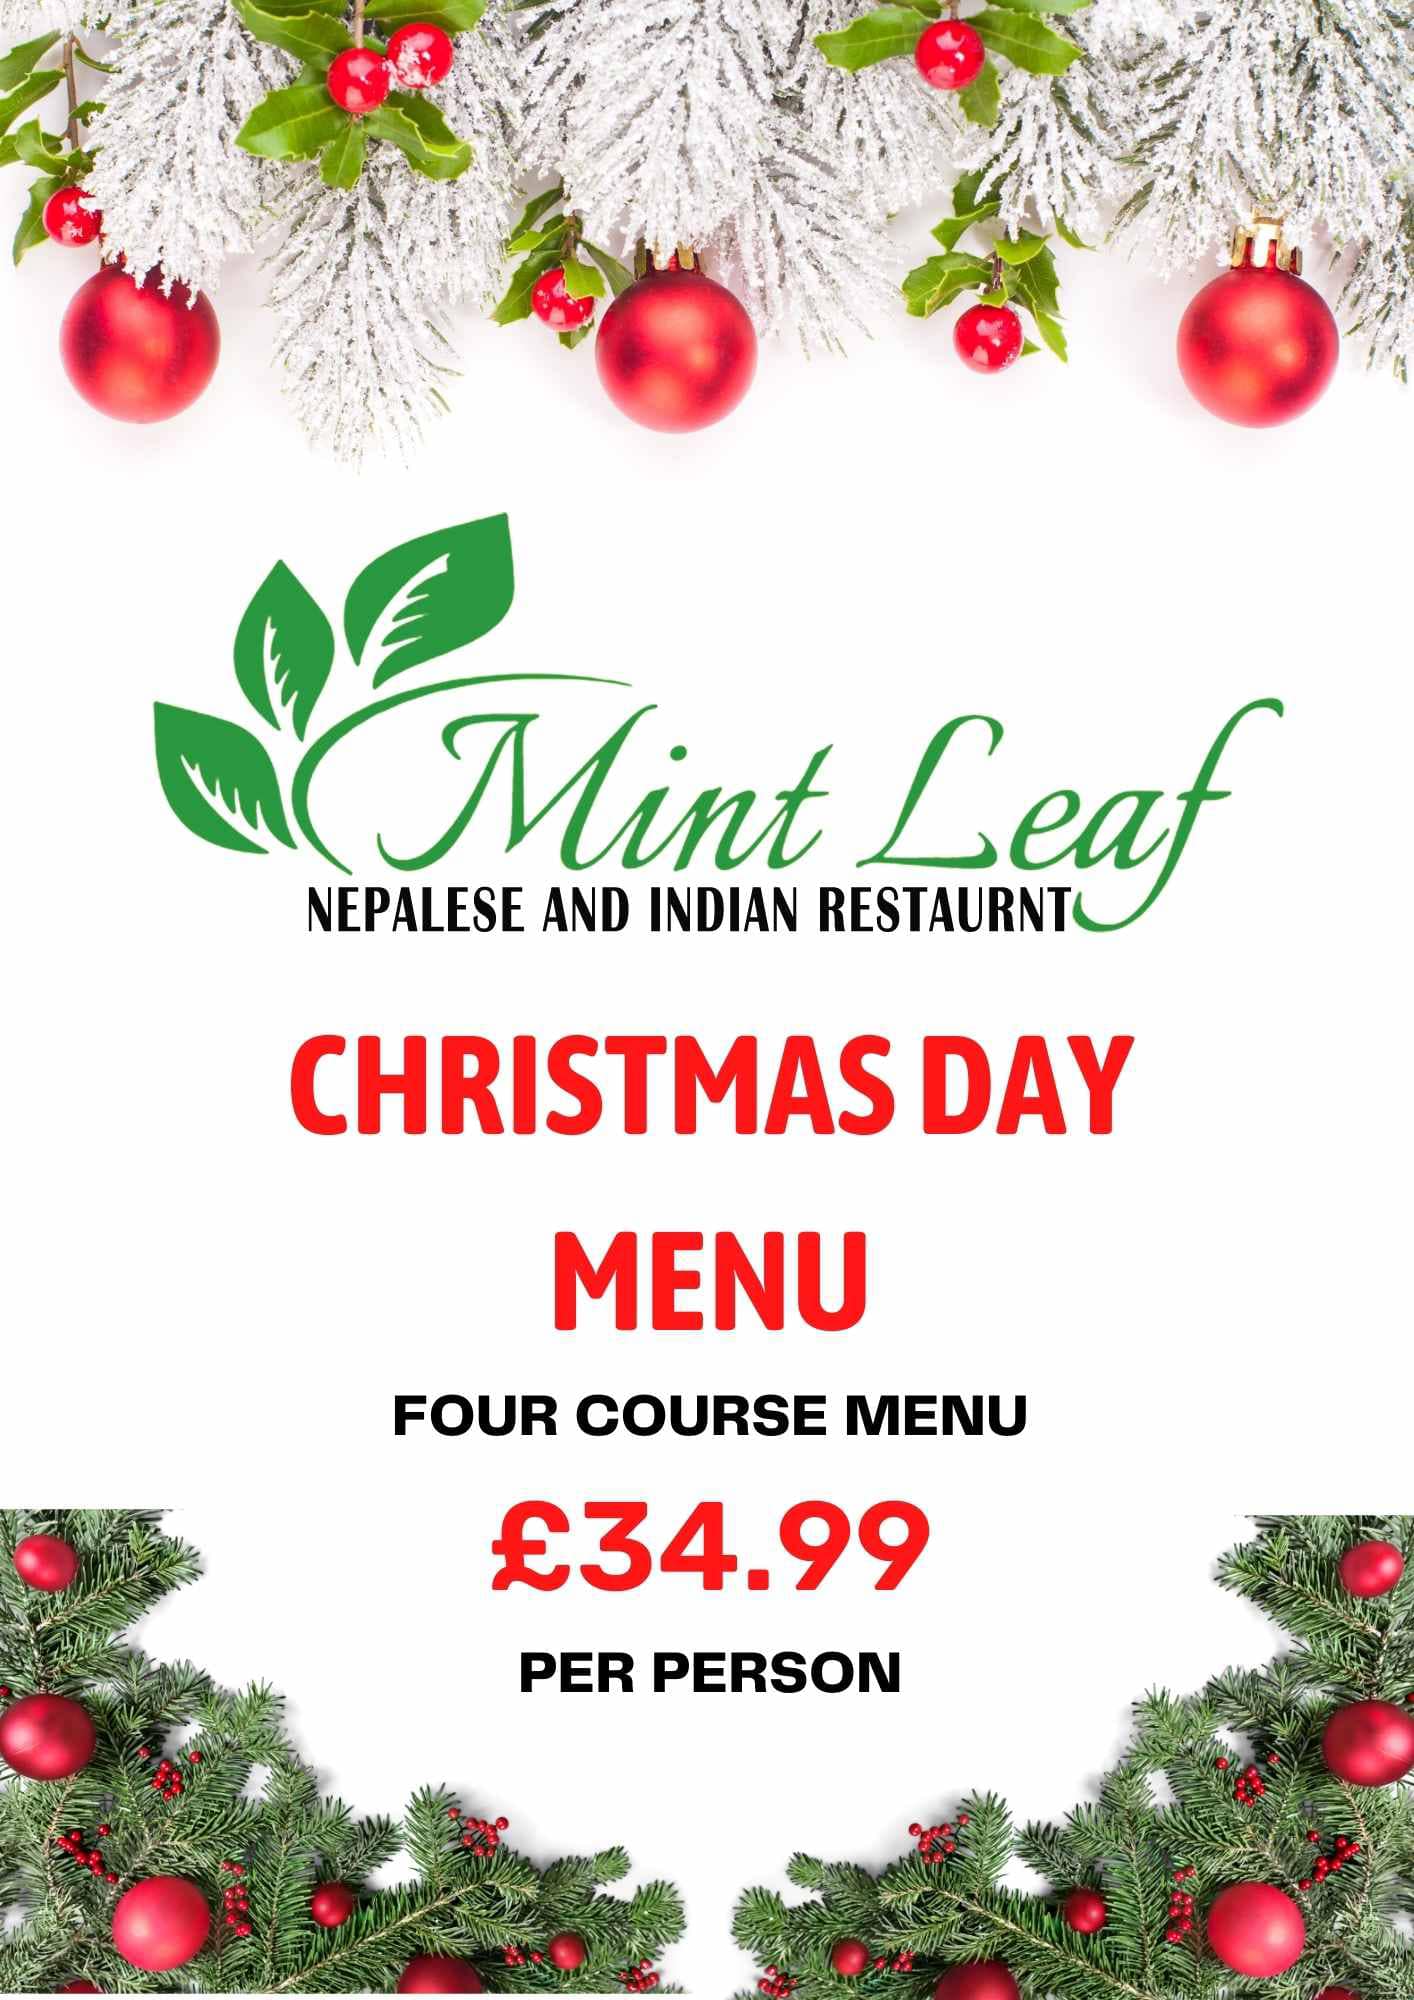 Mint leaf Nepalese and indian restaurant